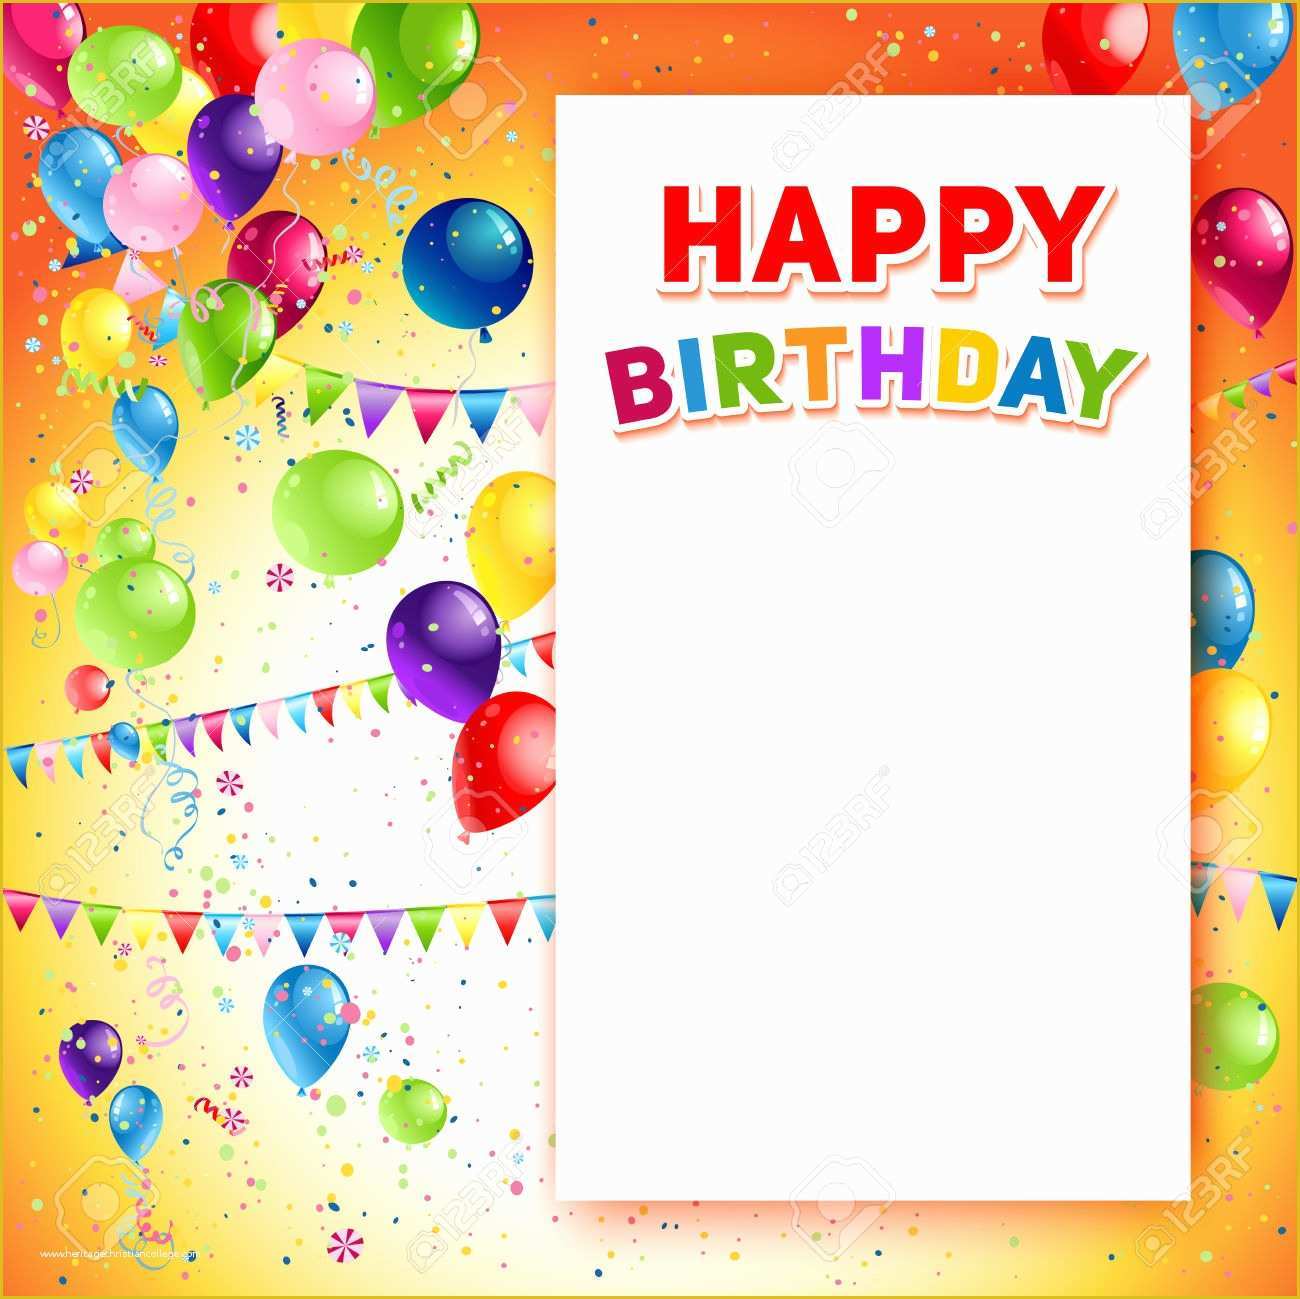 happy birthday photoshop template free download